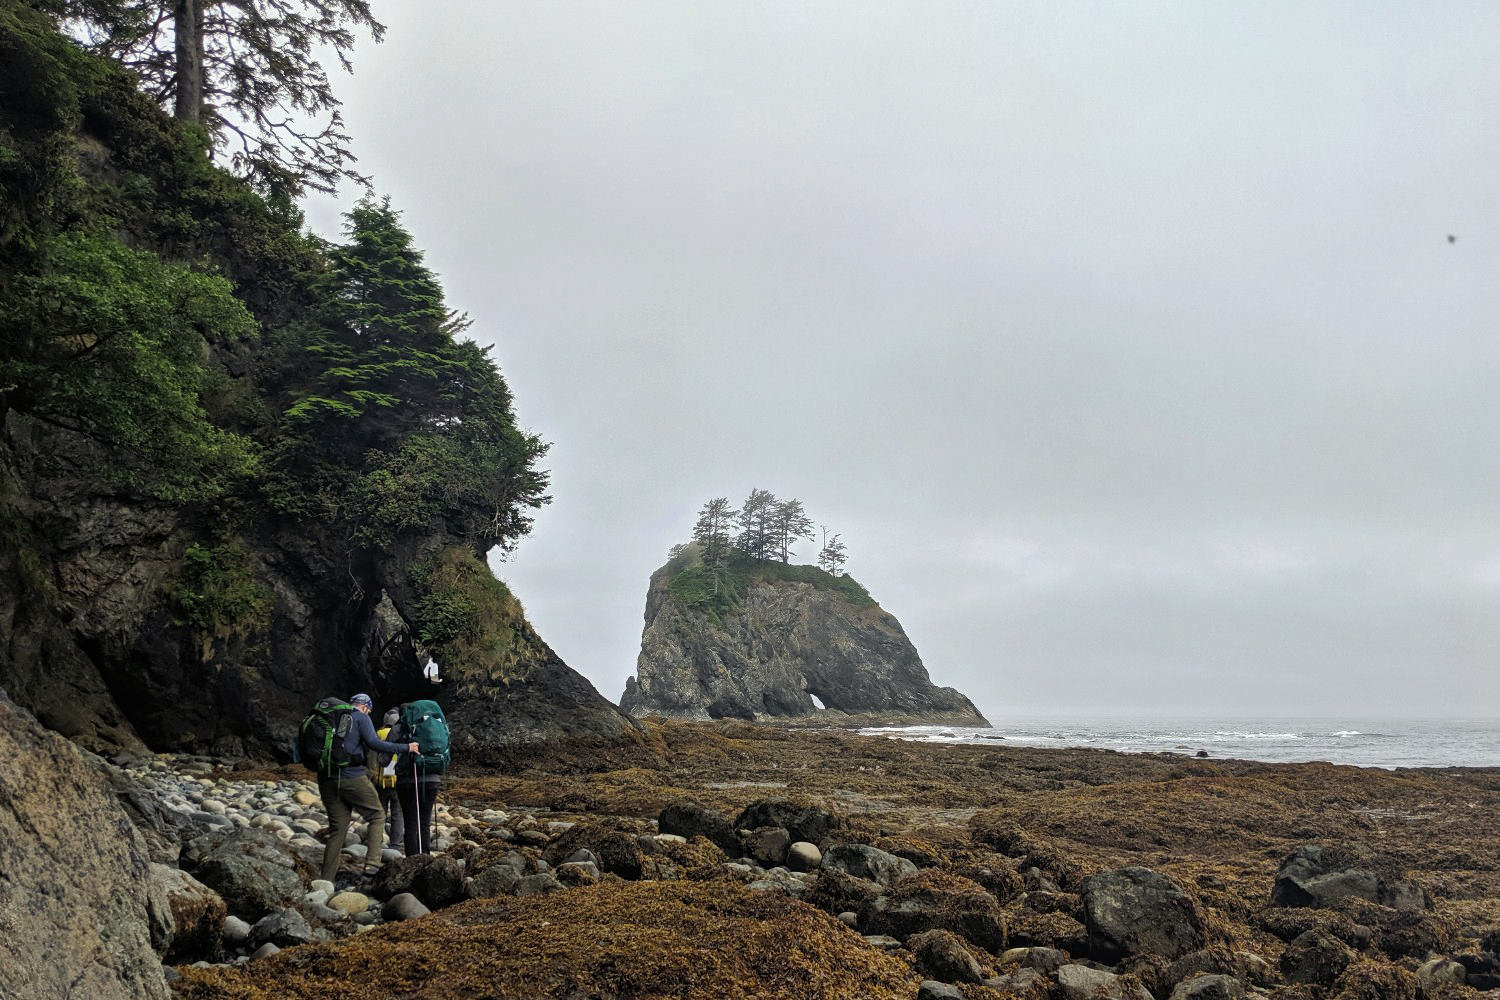 North Coast Route Backpacking Guide - IMG 20190617 103258 01 1500x1000